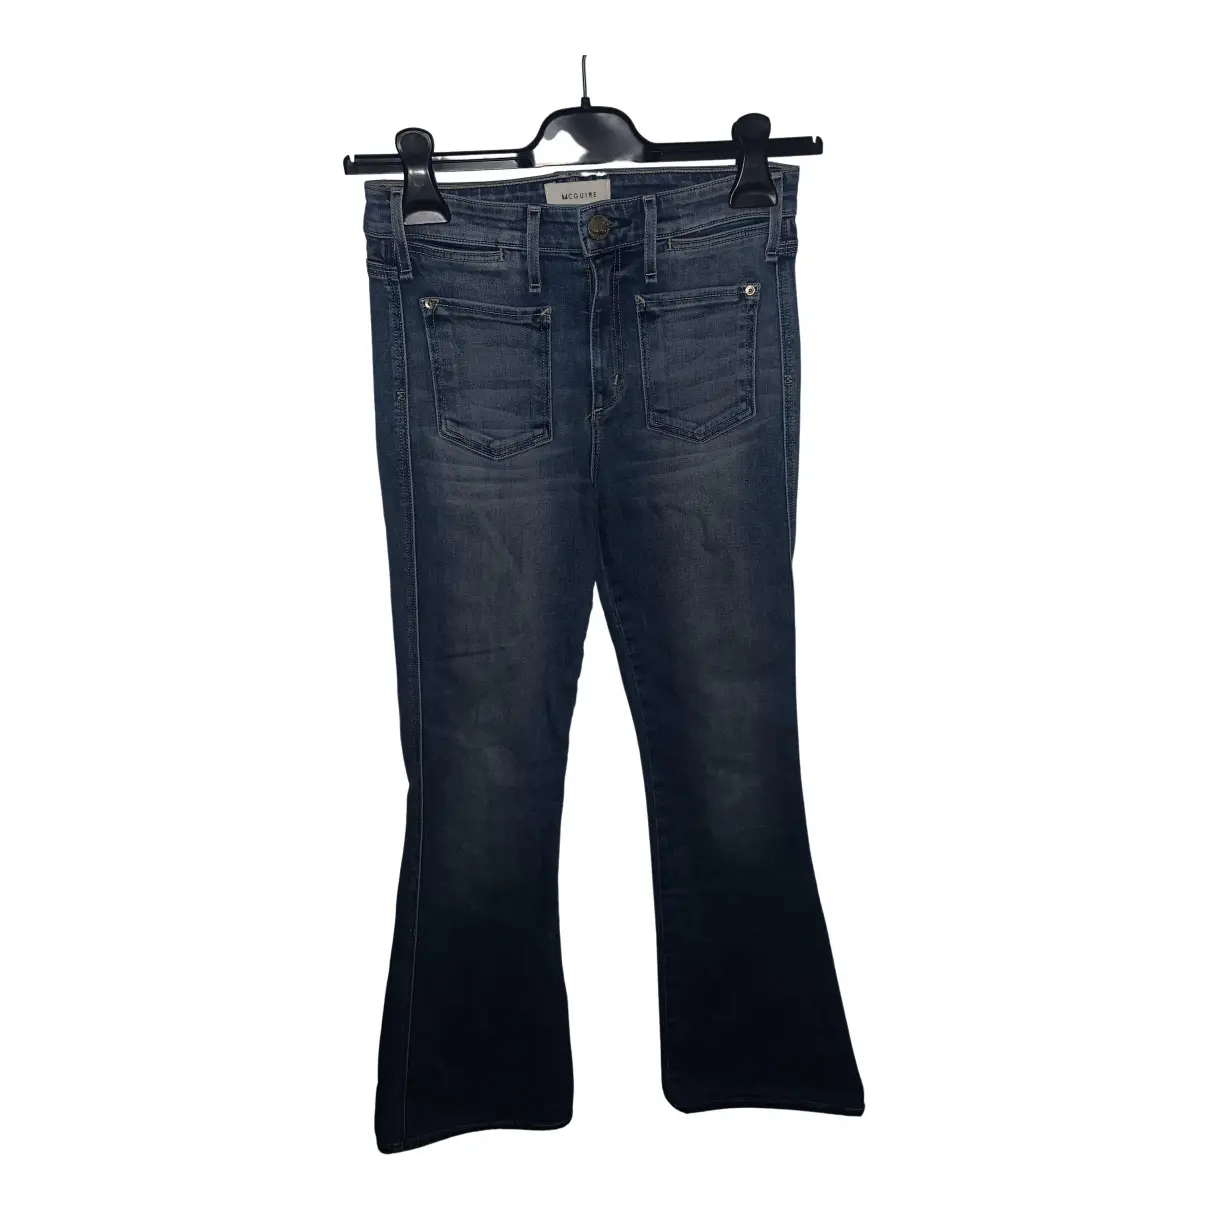 Bootcut jeans Mcguire